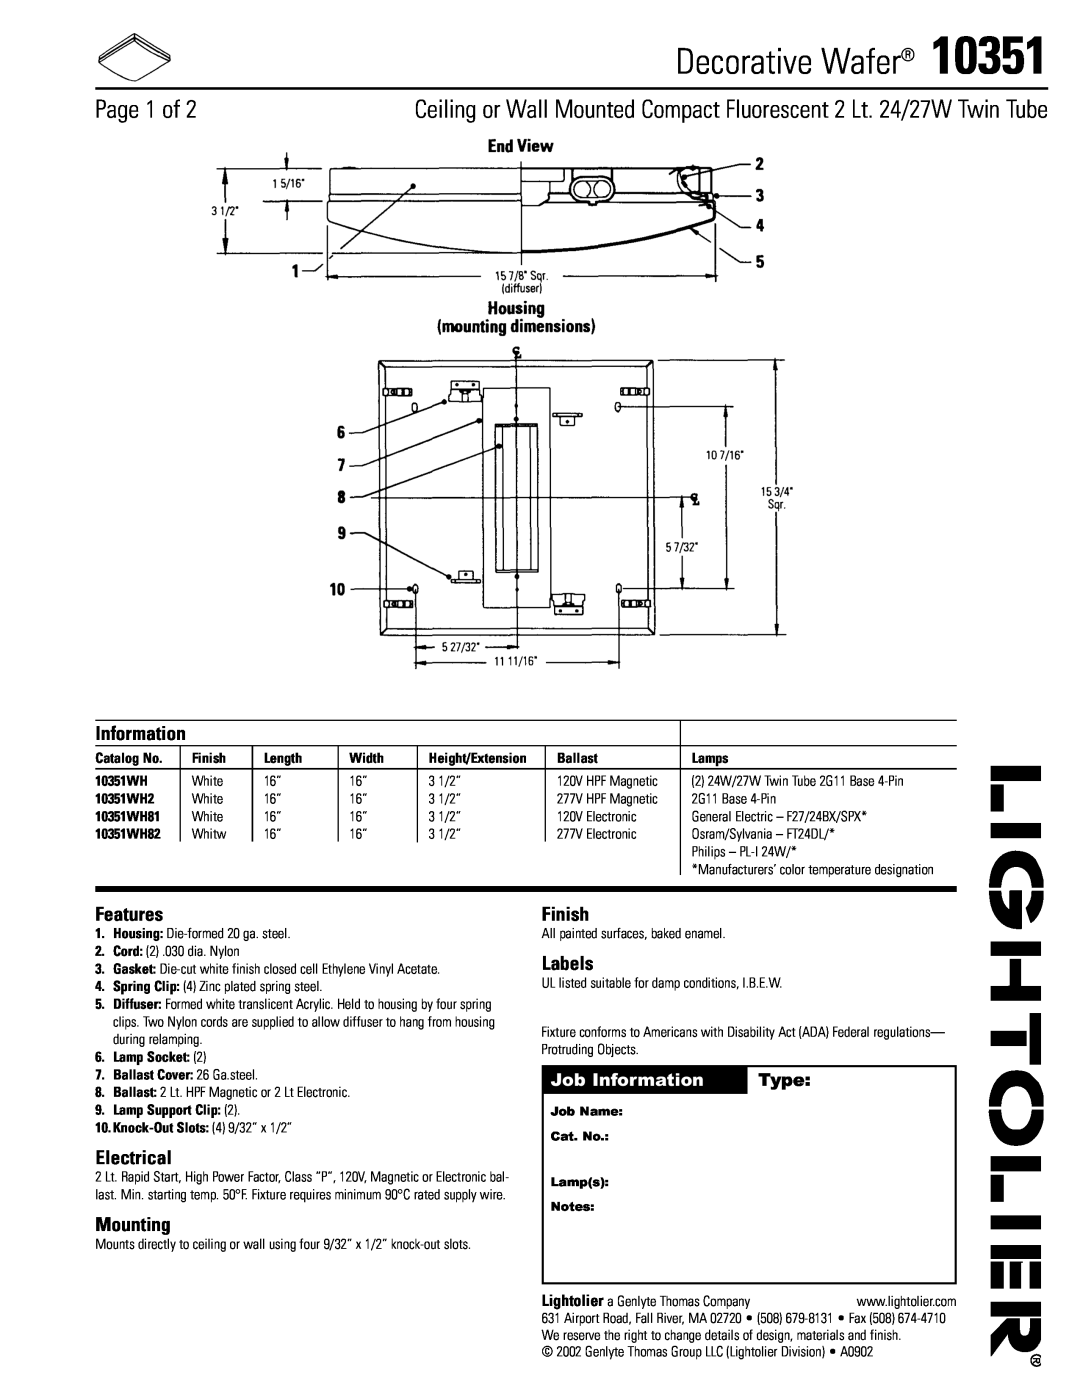 Lightolier 10351 manual Decorative Wafer, Page 1 of, Job Information, Type, Features, Electrical, Mounting, Finish 